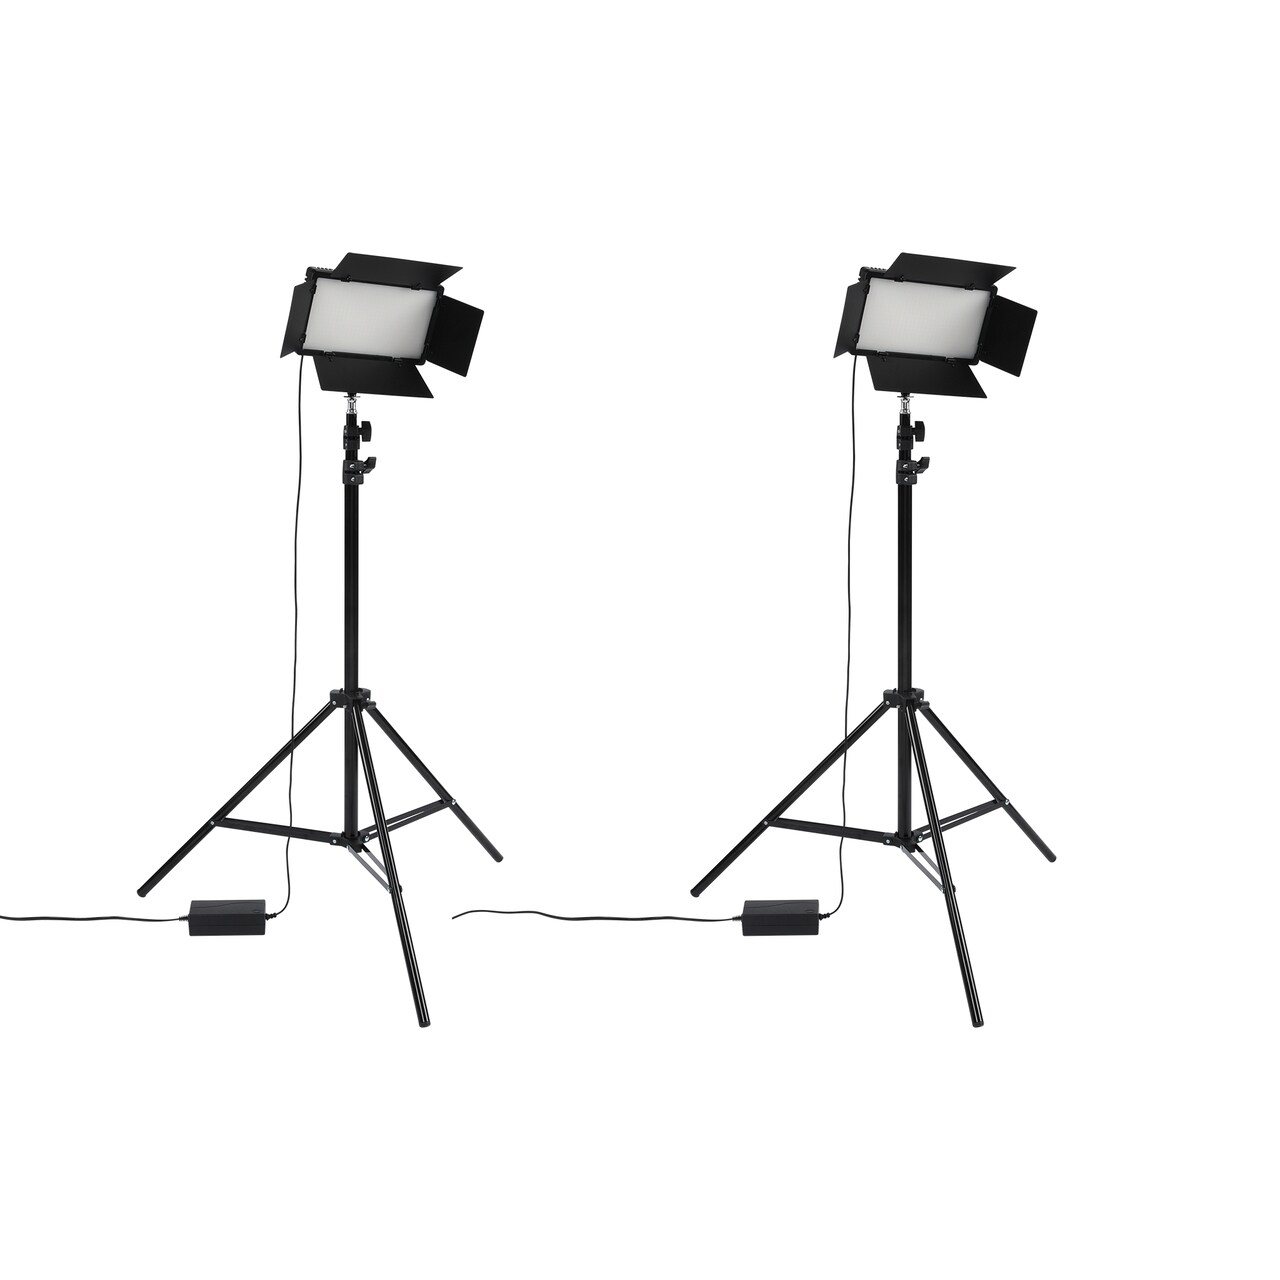 Acurit Colorview Lux Artist Studio Light 2 Pack - Adjustable Photography Lighting Kit 3 Color Temps, 4 Metal Barn Doors, 4160 Lumens LED - Remote Control, AC Power Supply, 6&#x2019;6&#x22; Light Stands Included